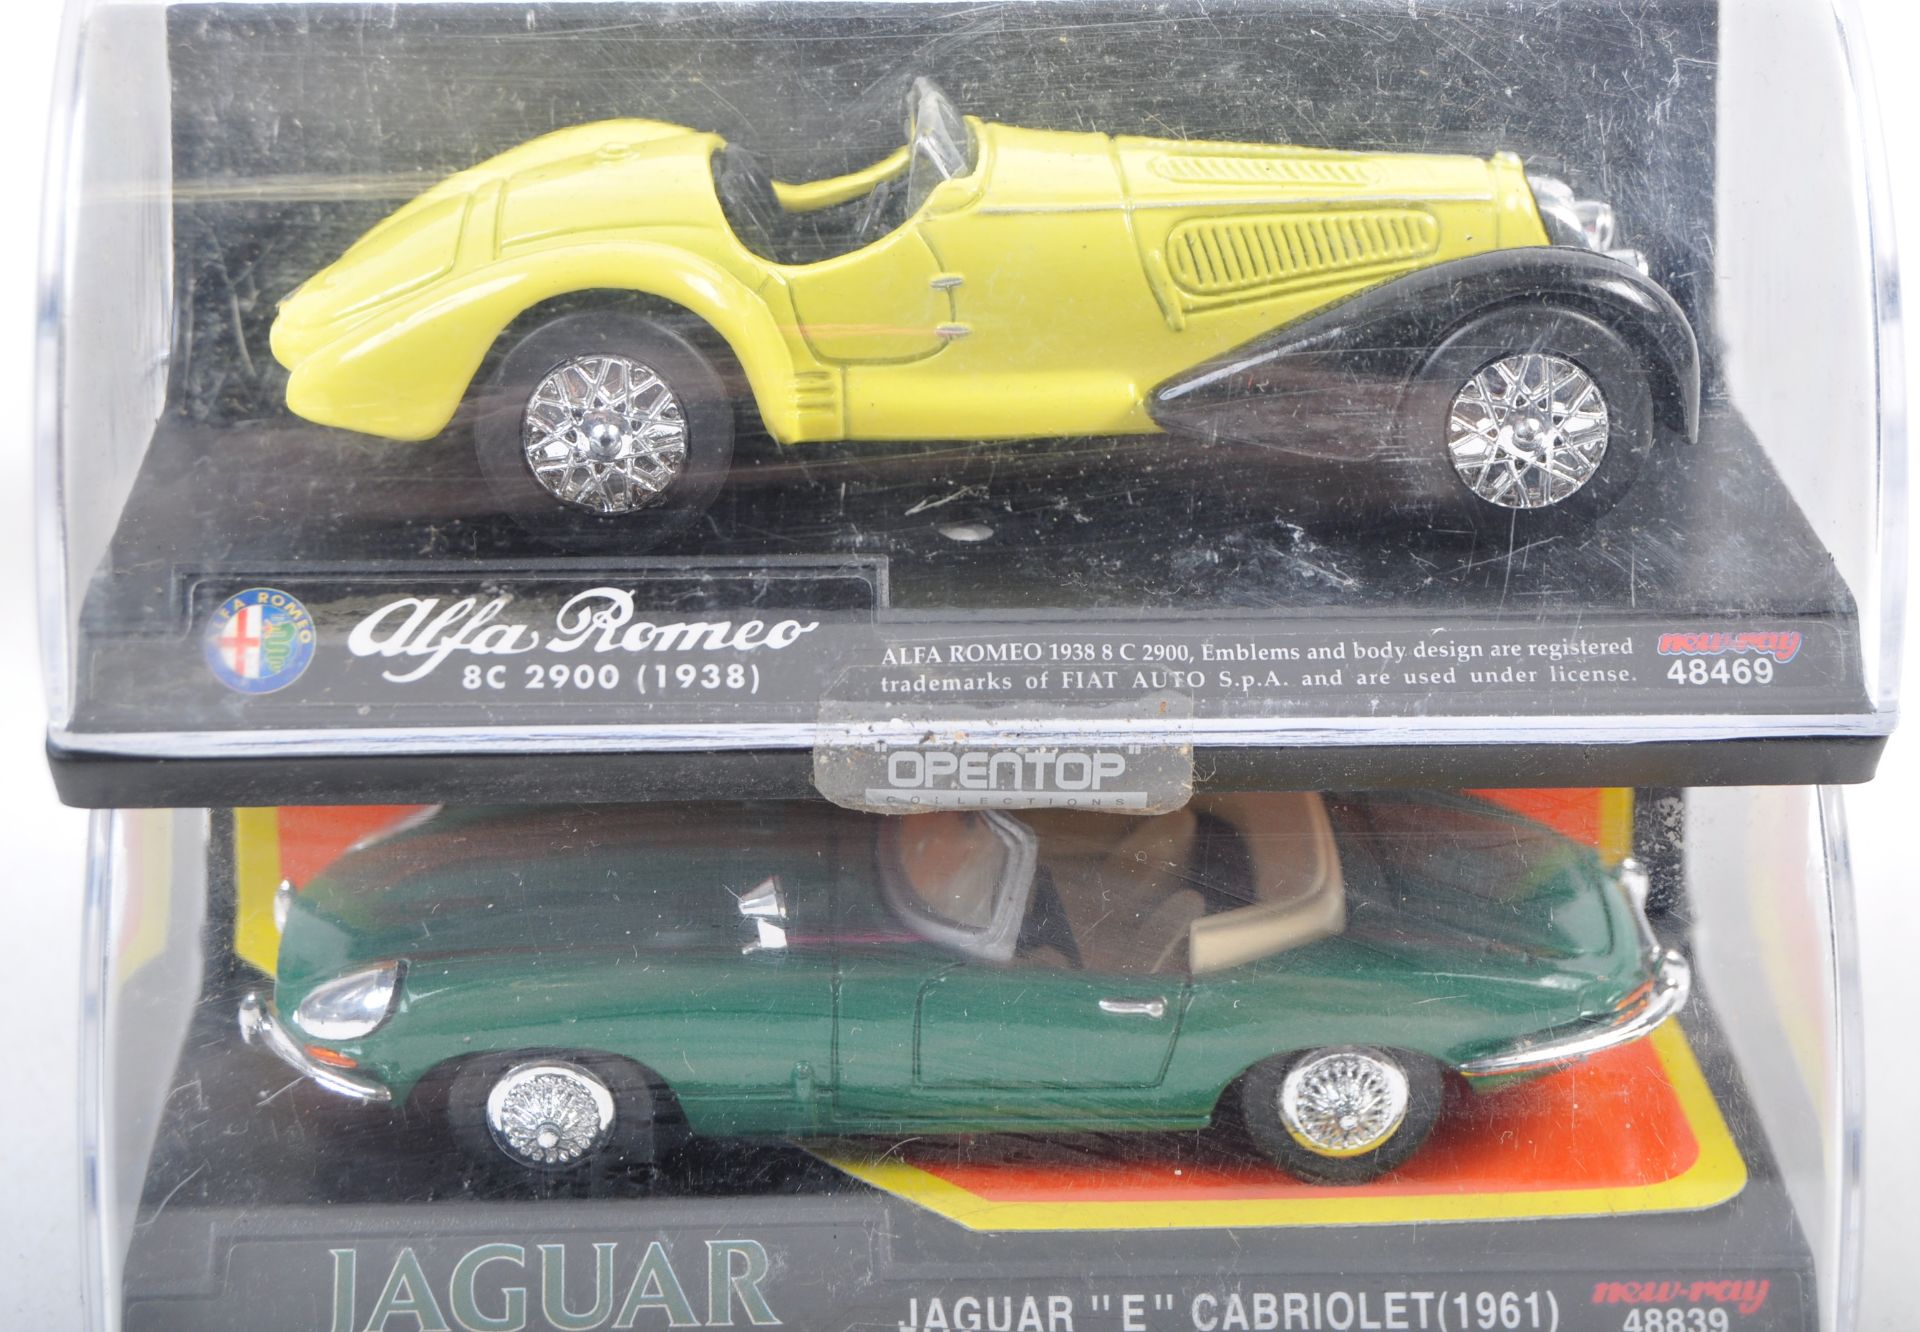 COLLECTION OF X5 NEW RAY 1/43 SCALE PRECISION DIECAST MODEL CARS - Image 3 of 4